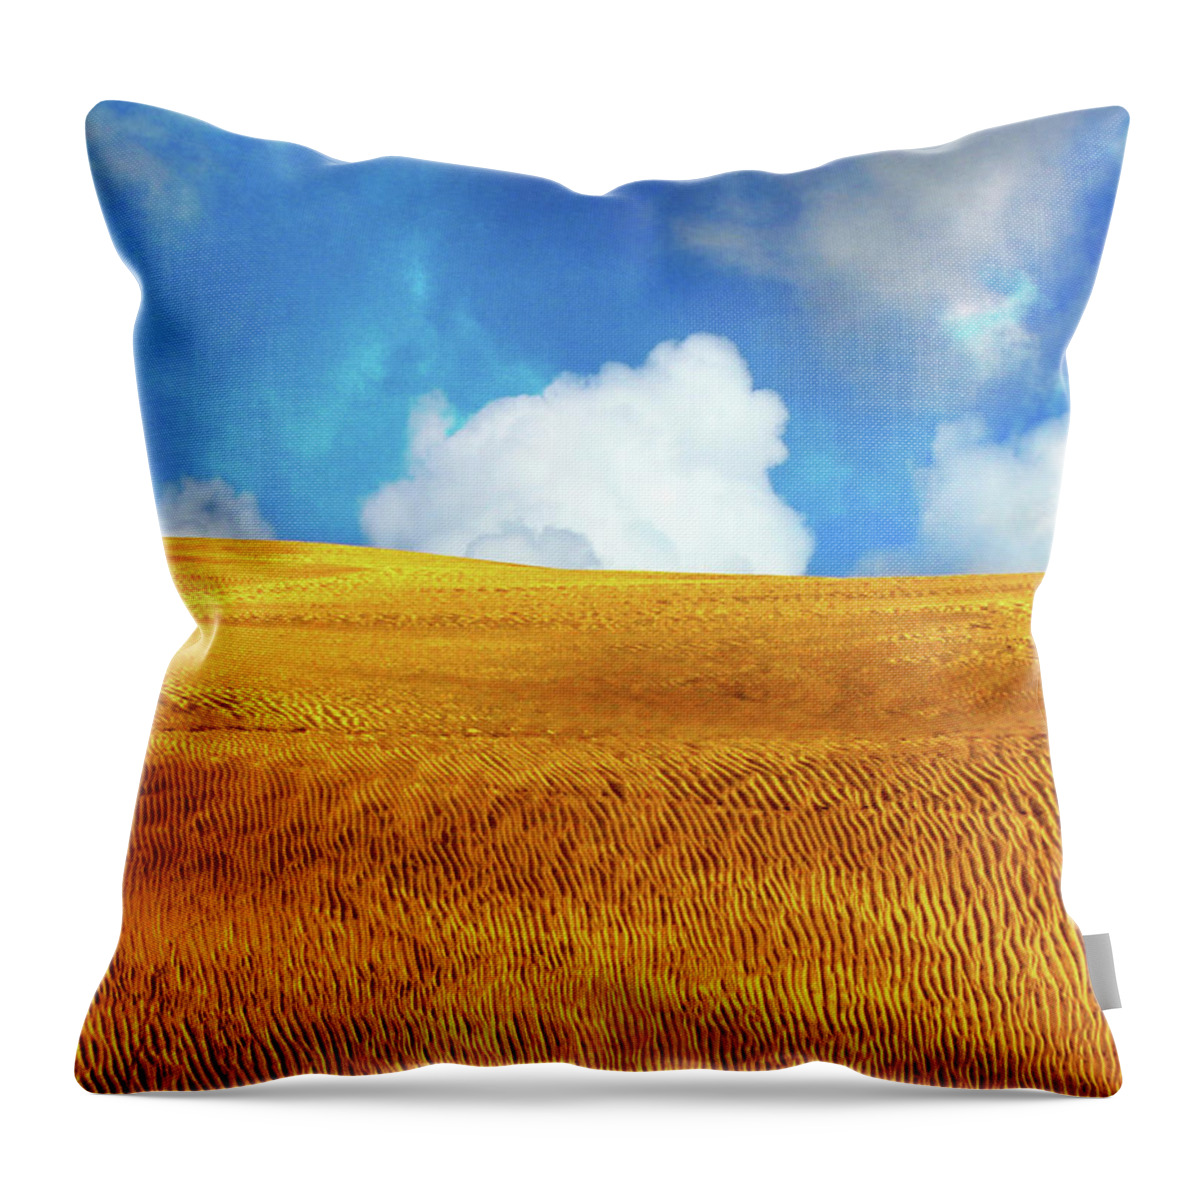 Sand Dunes Throw Pillow featuring the photograph Dune and Clouds by Timothy Bulone